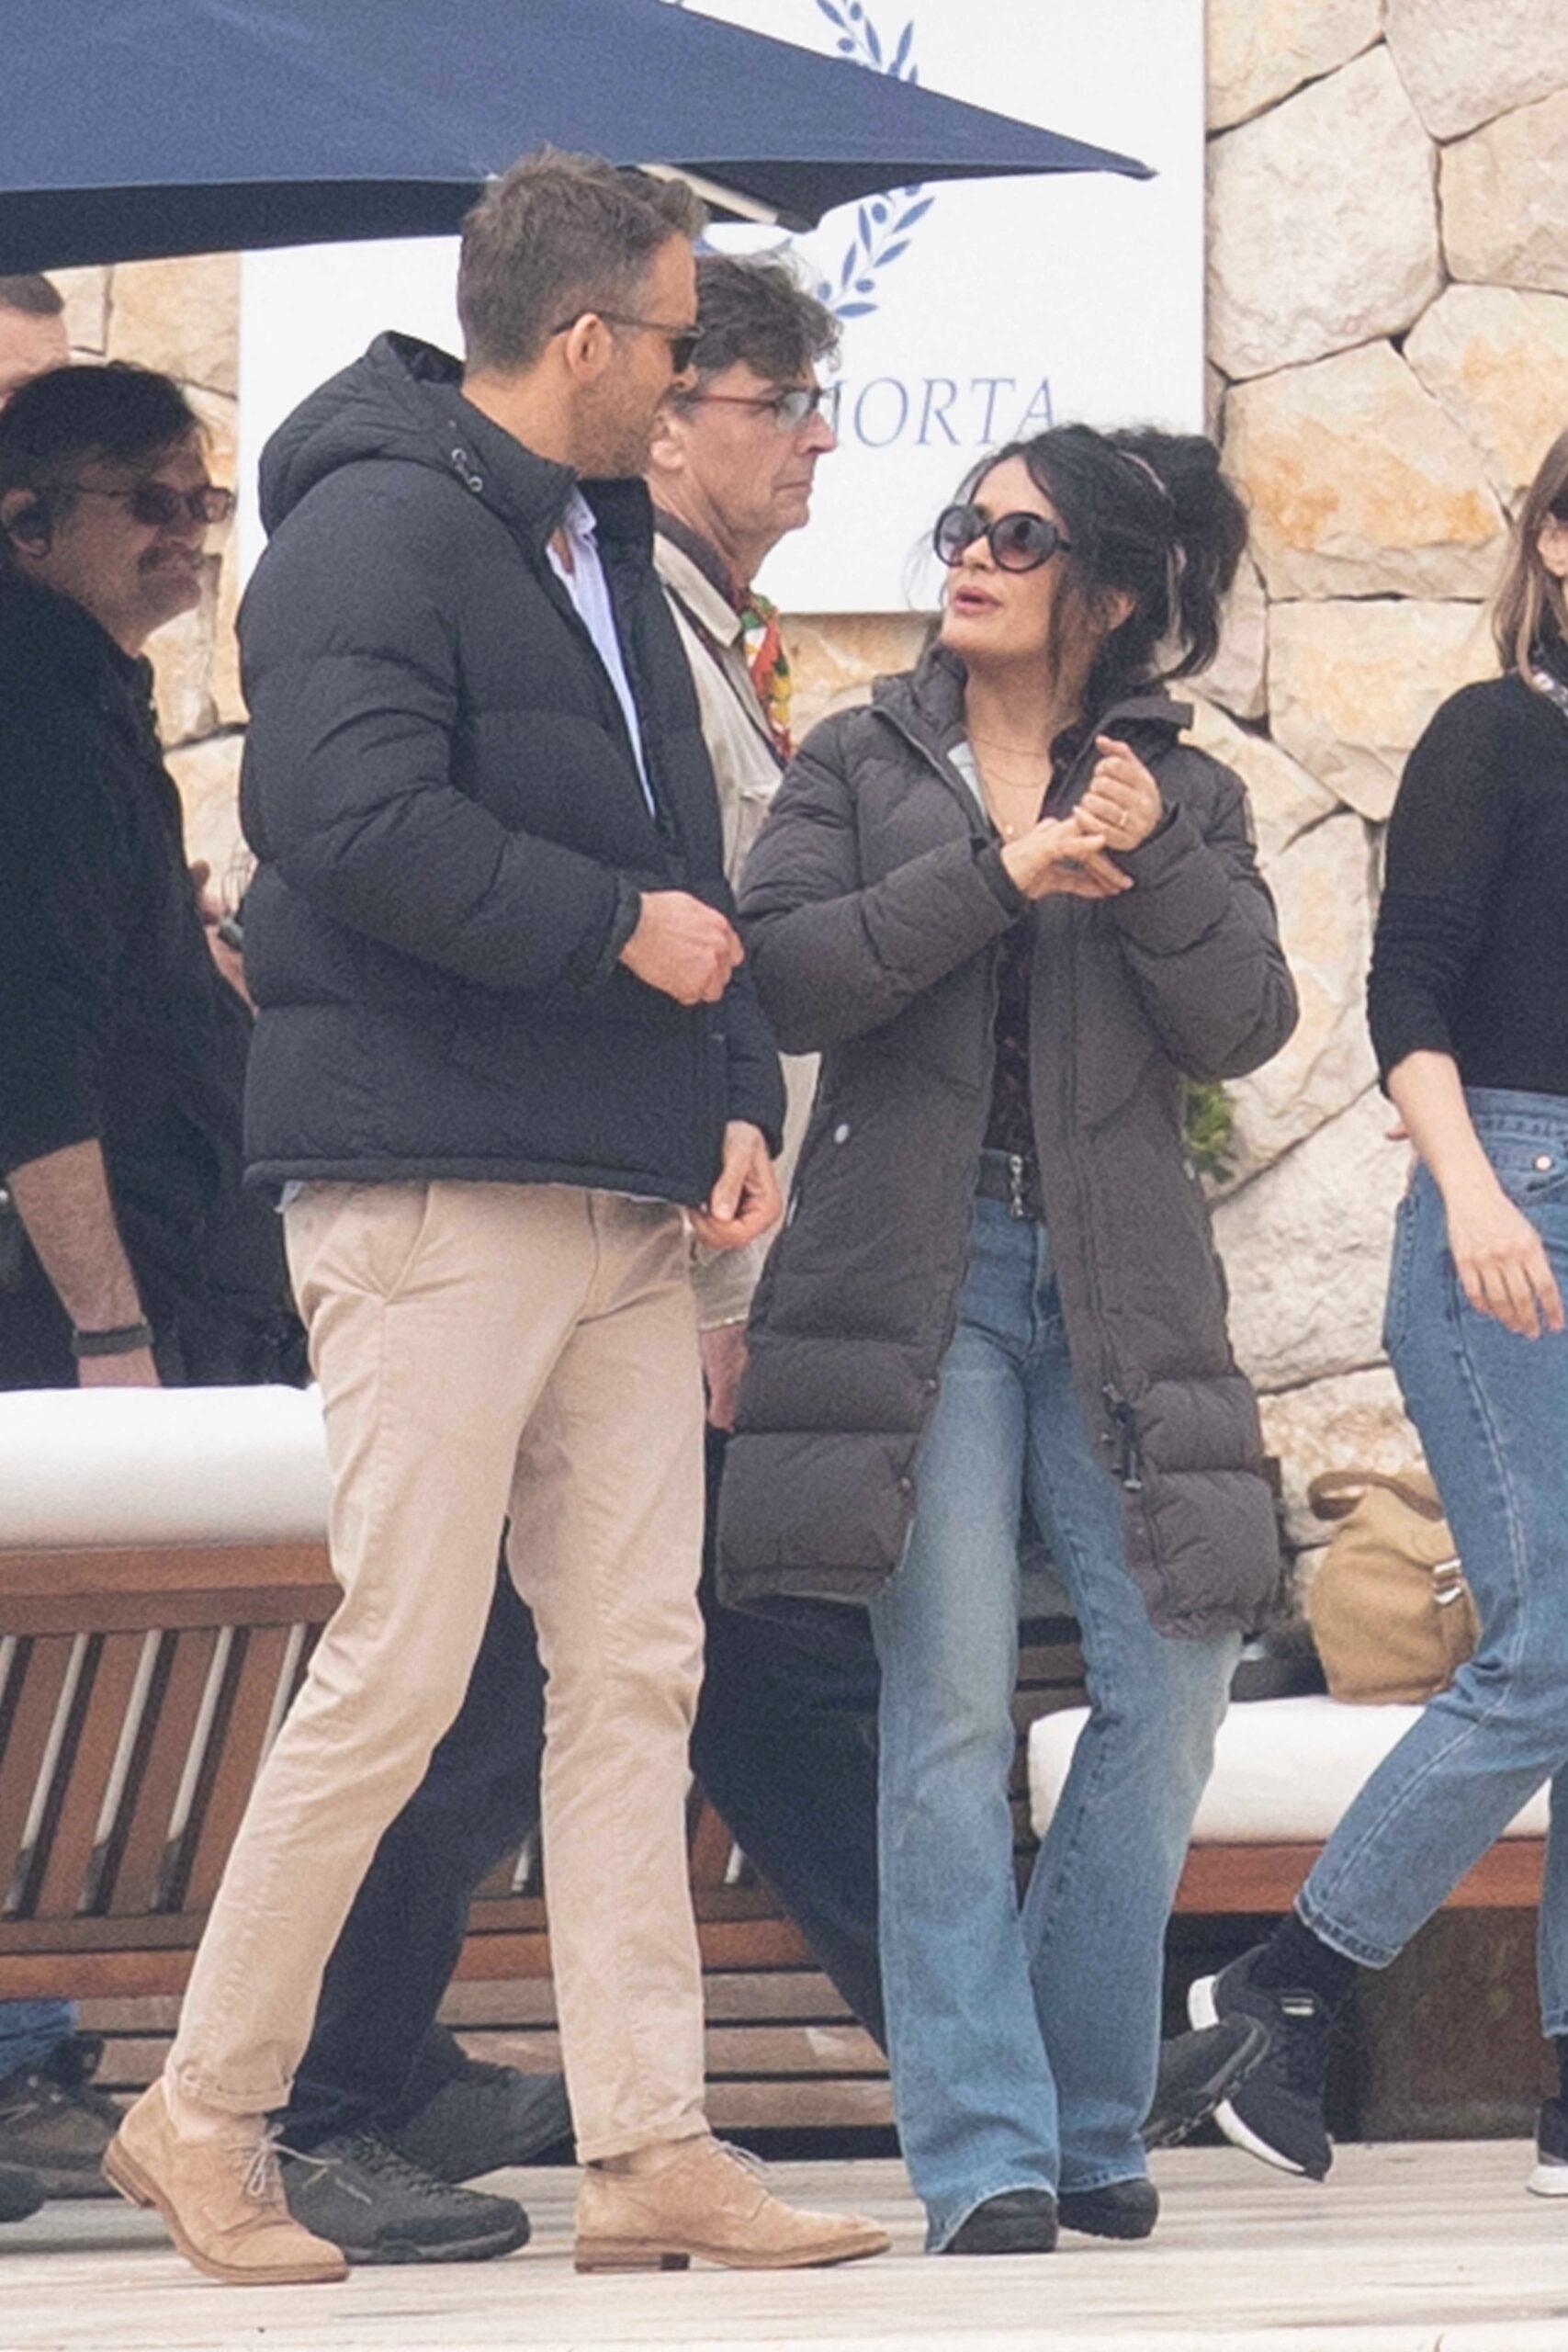 Ryan Reynolds and Salma Hayek have an animated chat between takes as they shoot The Hitman's Wife's Bodyguard in Croatia.